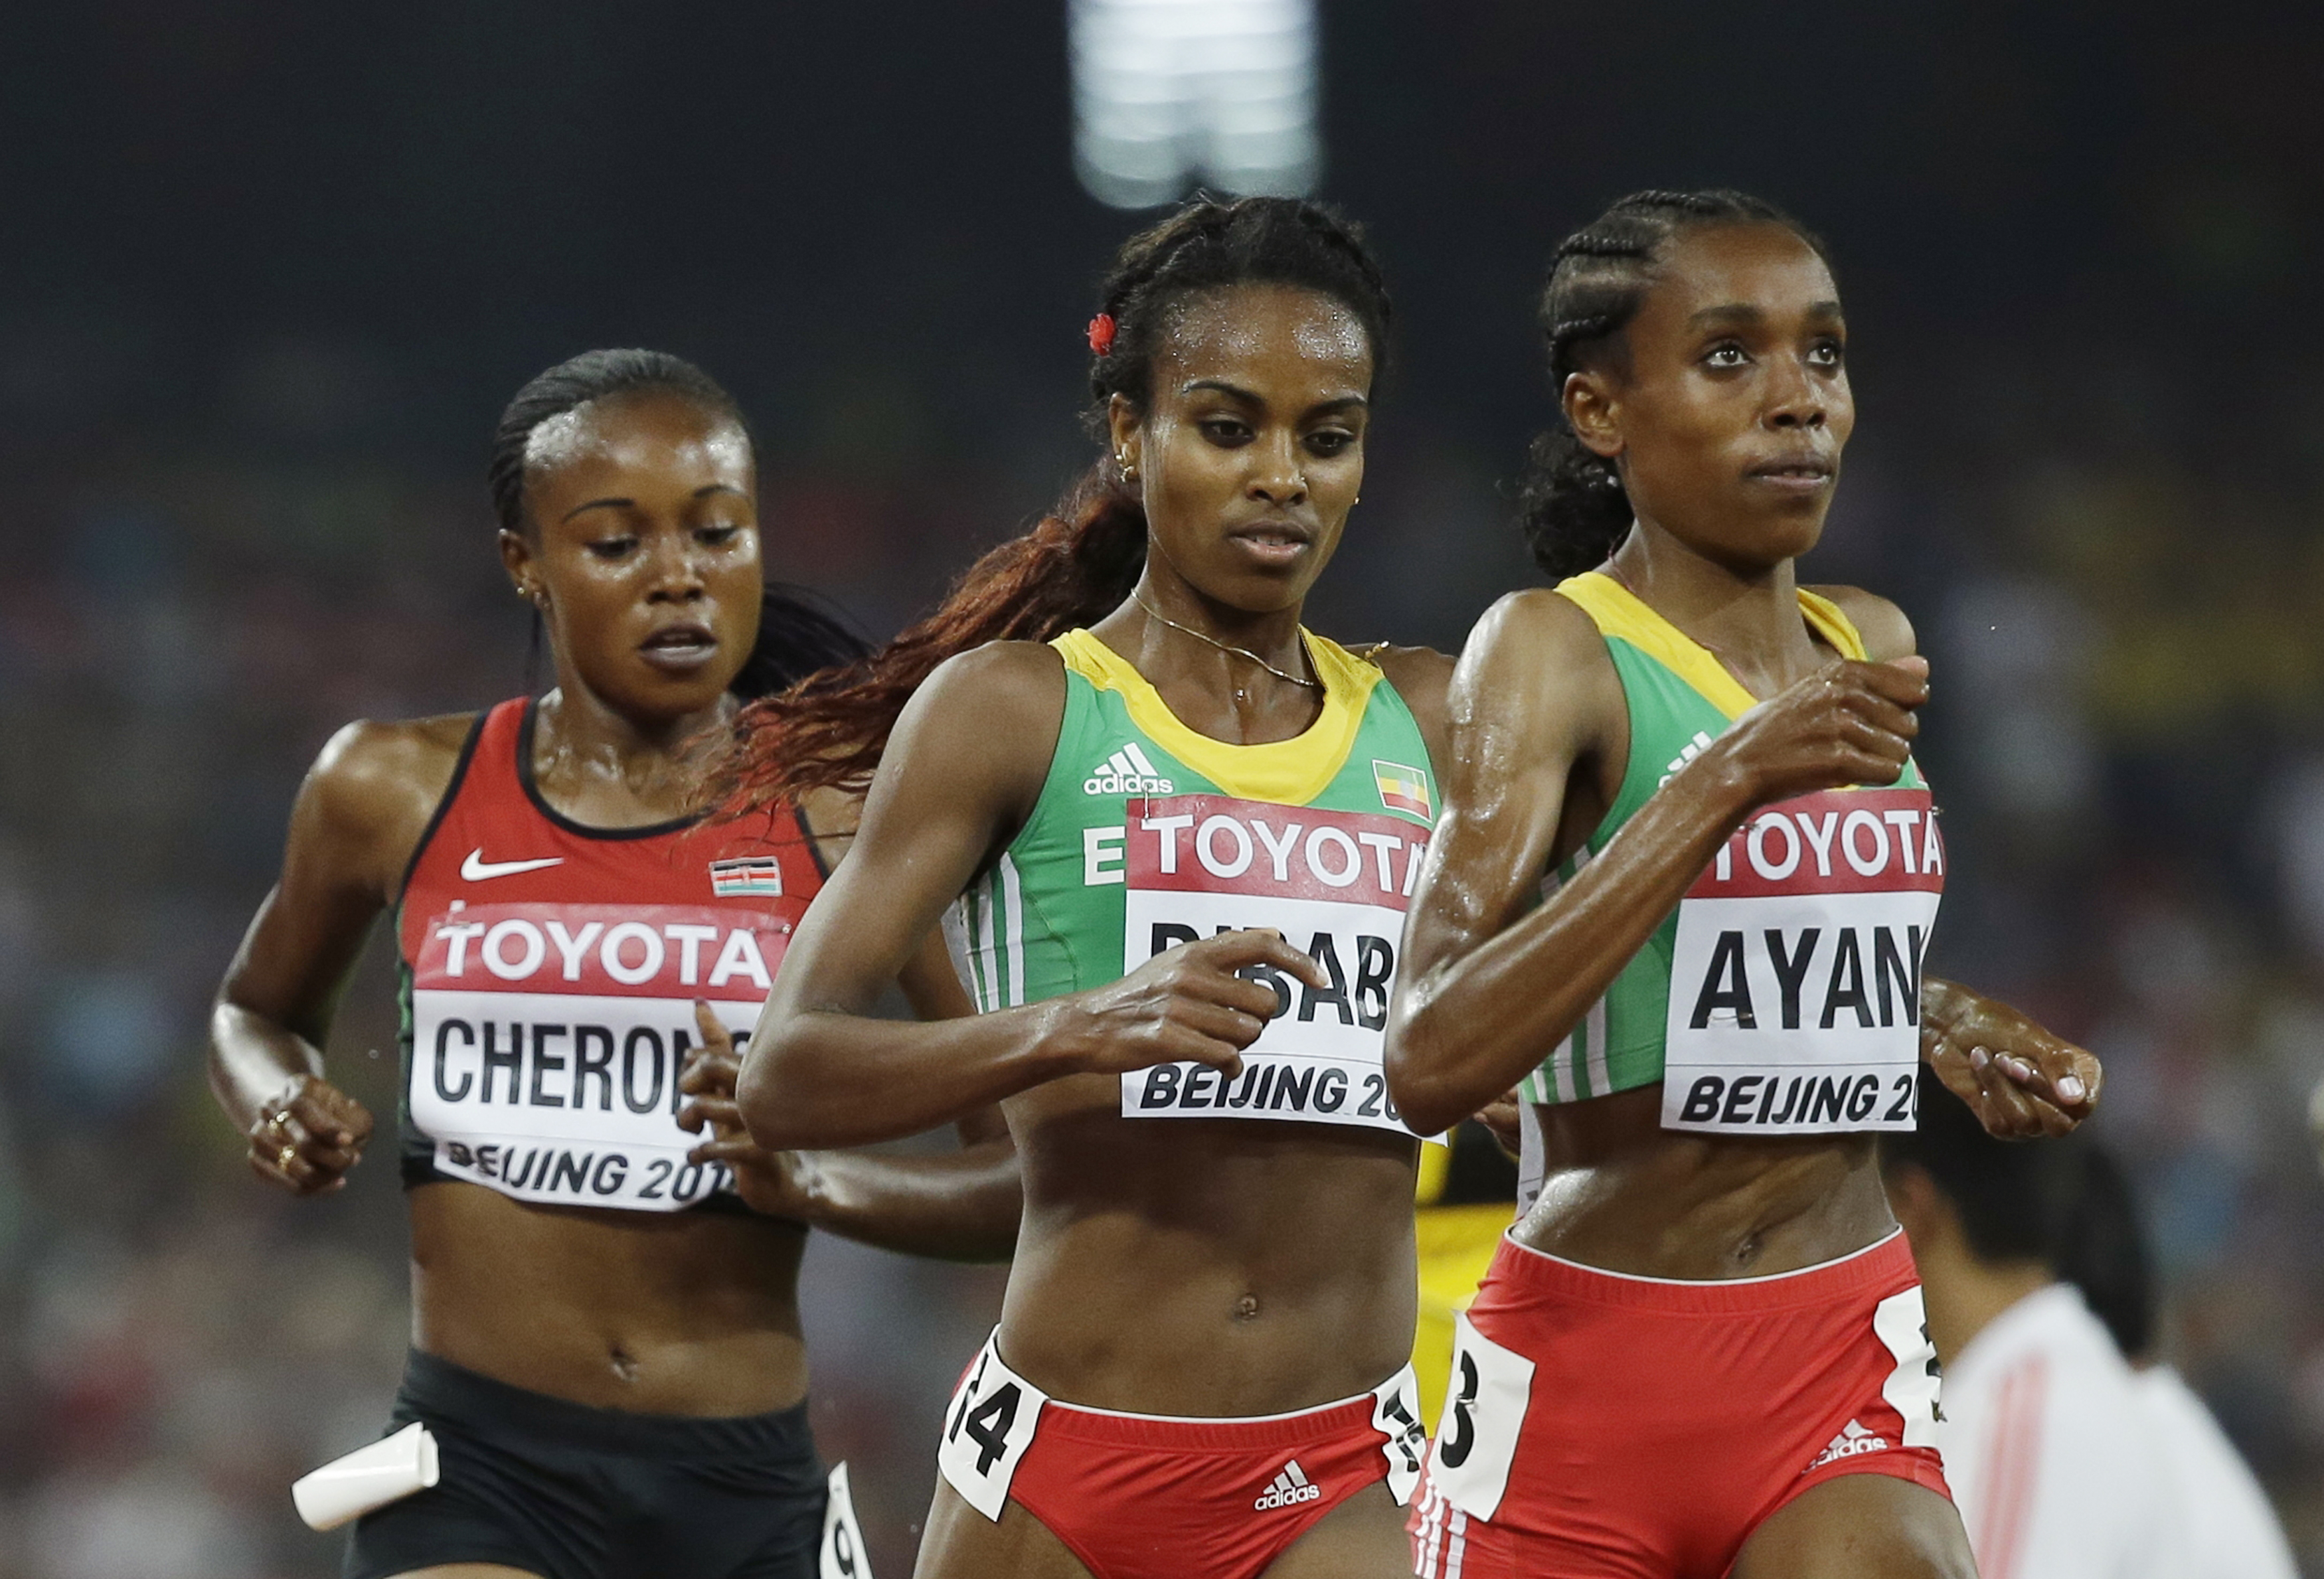 Ethiopia's Almaz Ayana, leads, Ethiopia's Genzebe Dibaba and Kenya's Mercy Cherono in the womenu0092s 5000m final at the World Athletics Championships at the Bird's Nest stadium in Beijing, Sunday, Aug. 30, 2015. Photo: AP